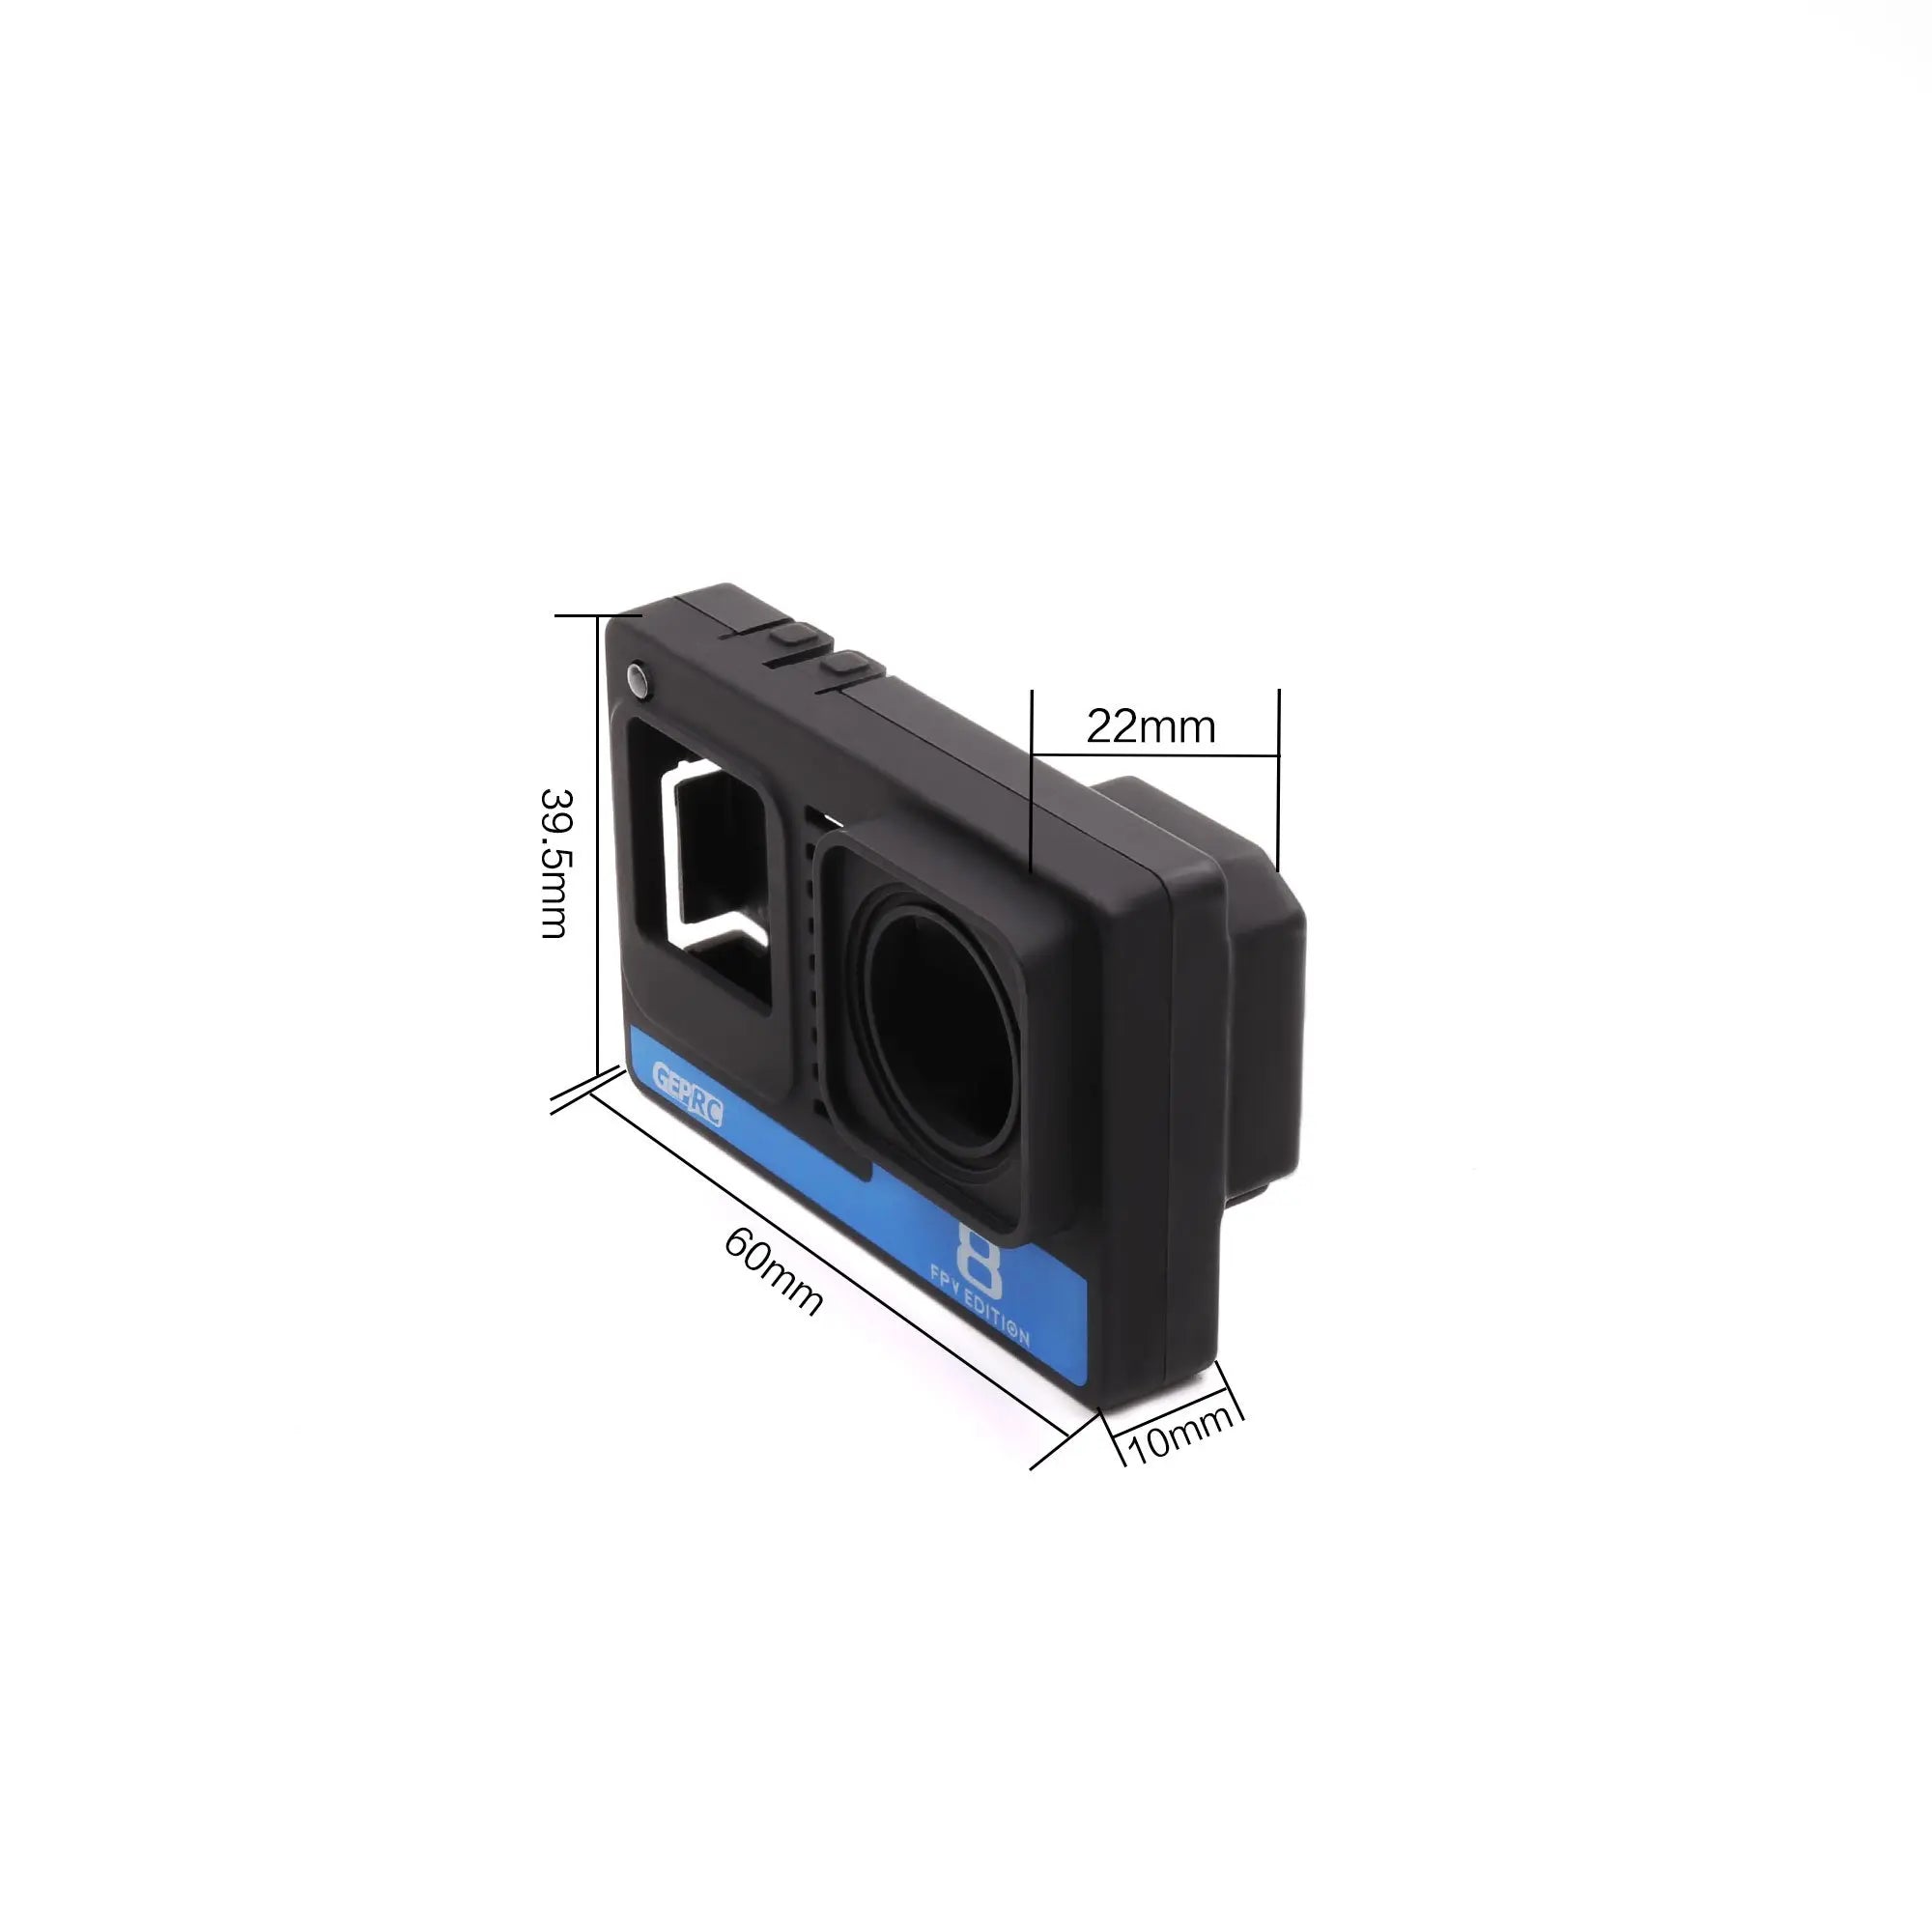 GEPRC Naked GoPro Hero 8 Case, the case is made of ABS material with light weight and high strength . the surface is 